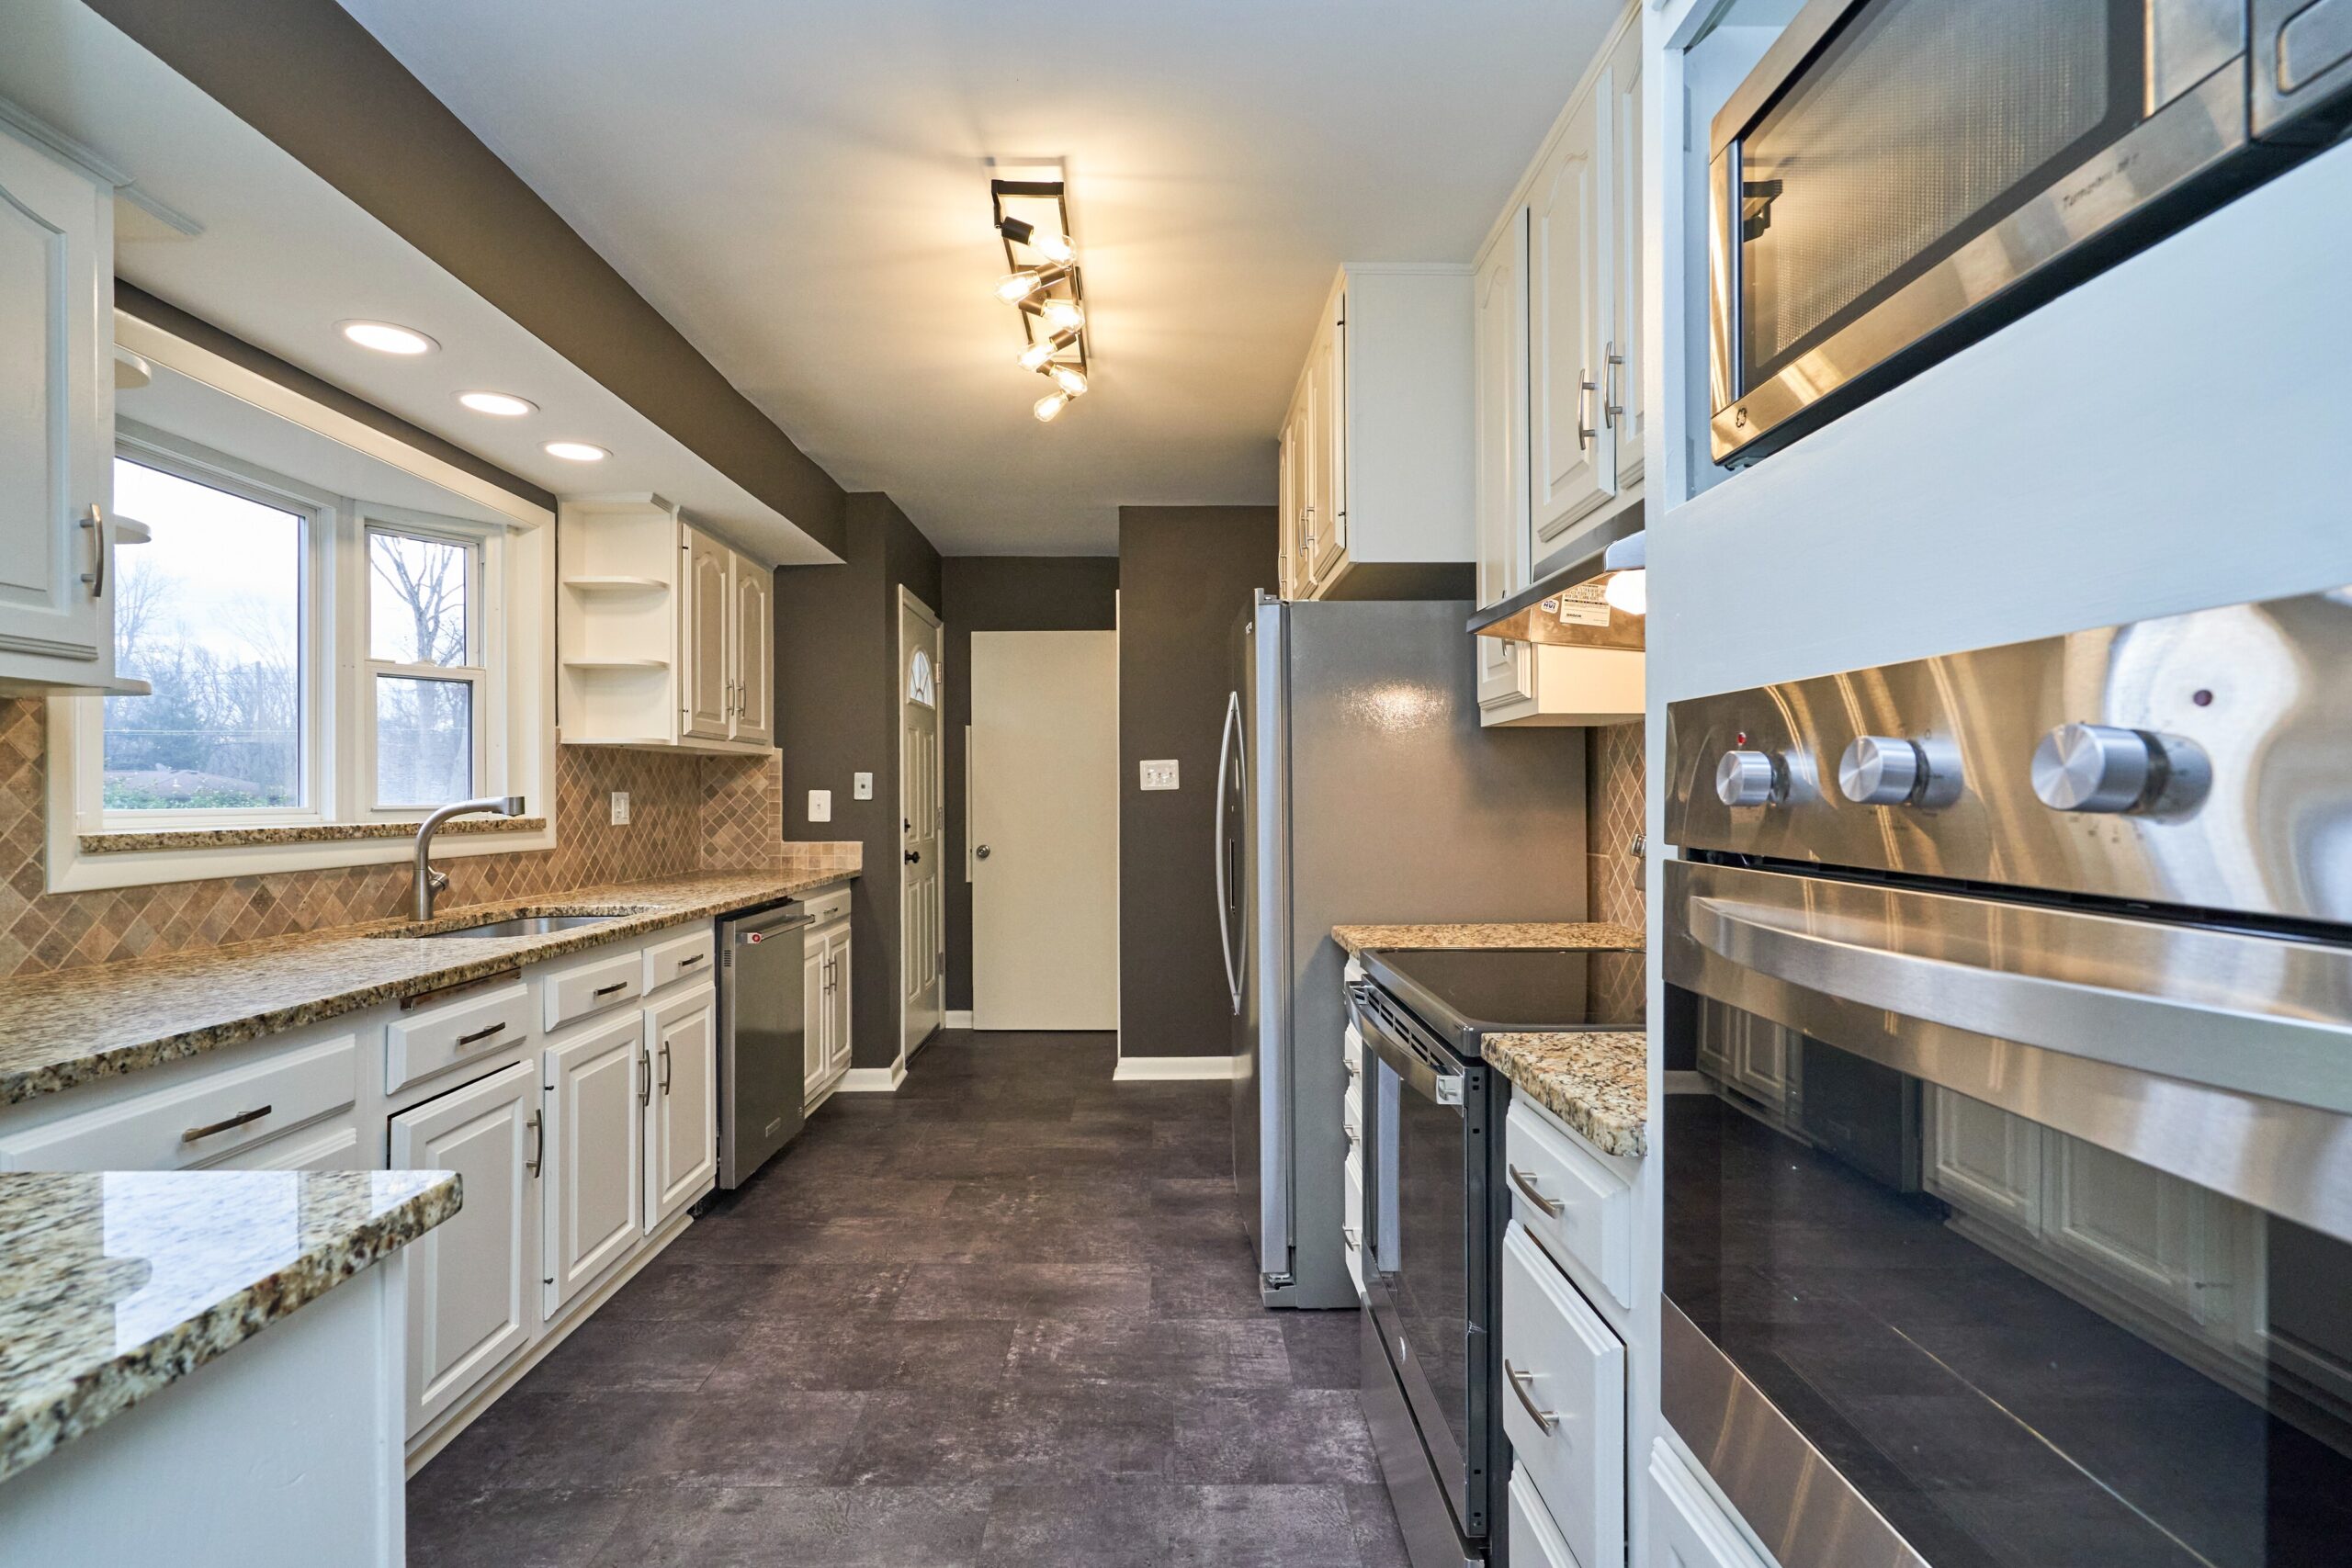 Professional interior photo of 3482 Mildred Drive in Falls Church virginia, showing the kitchen from one end with updated light fixtures, granite counters and new stainless appliances